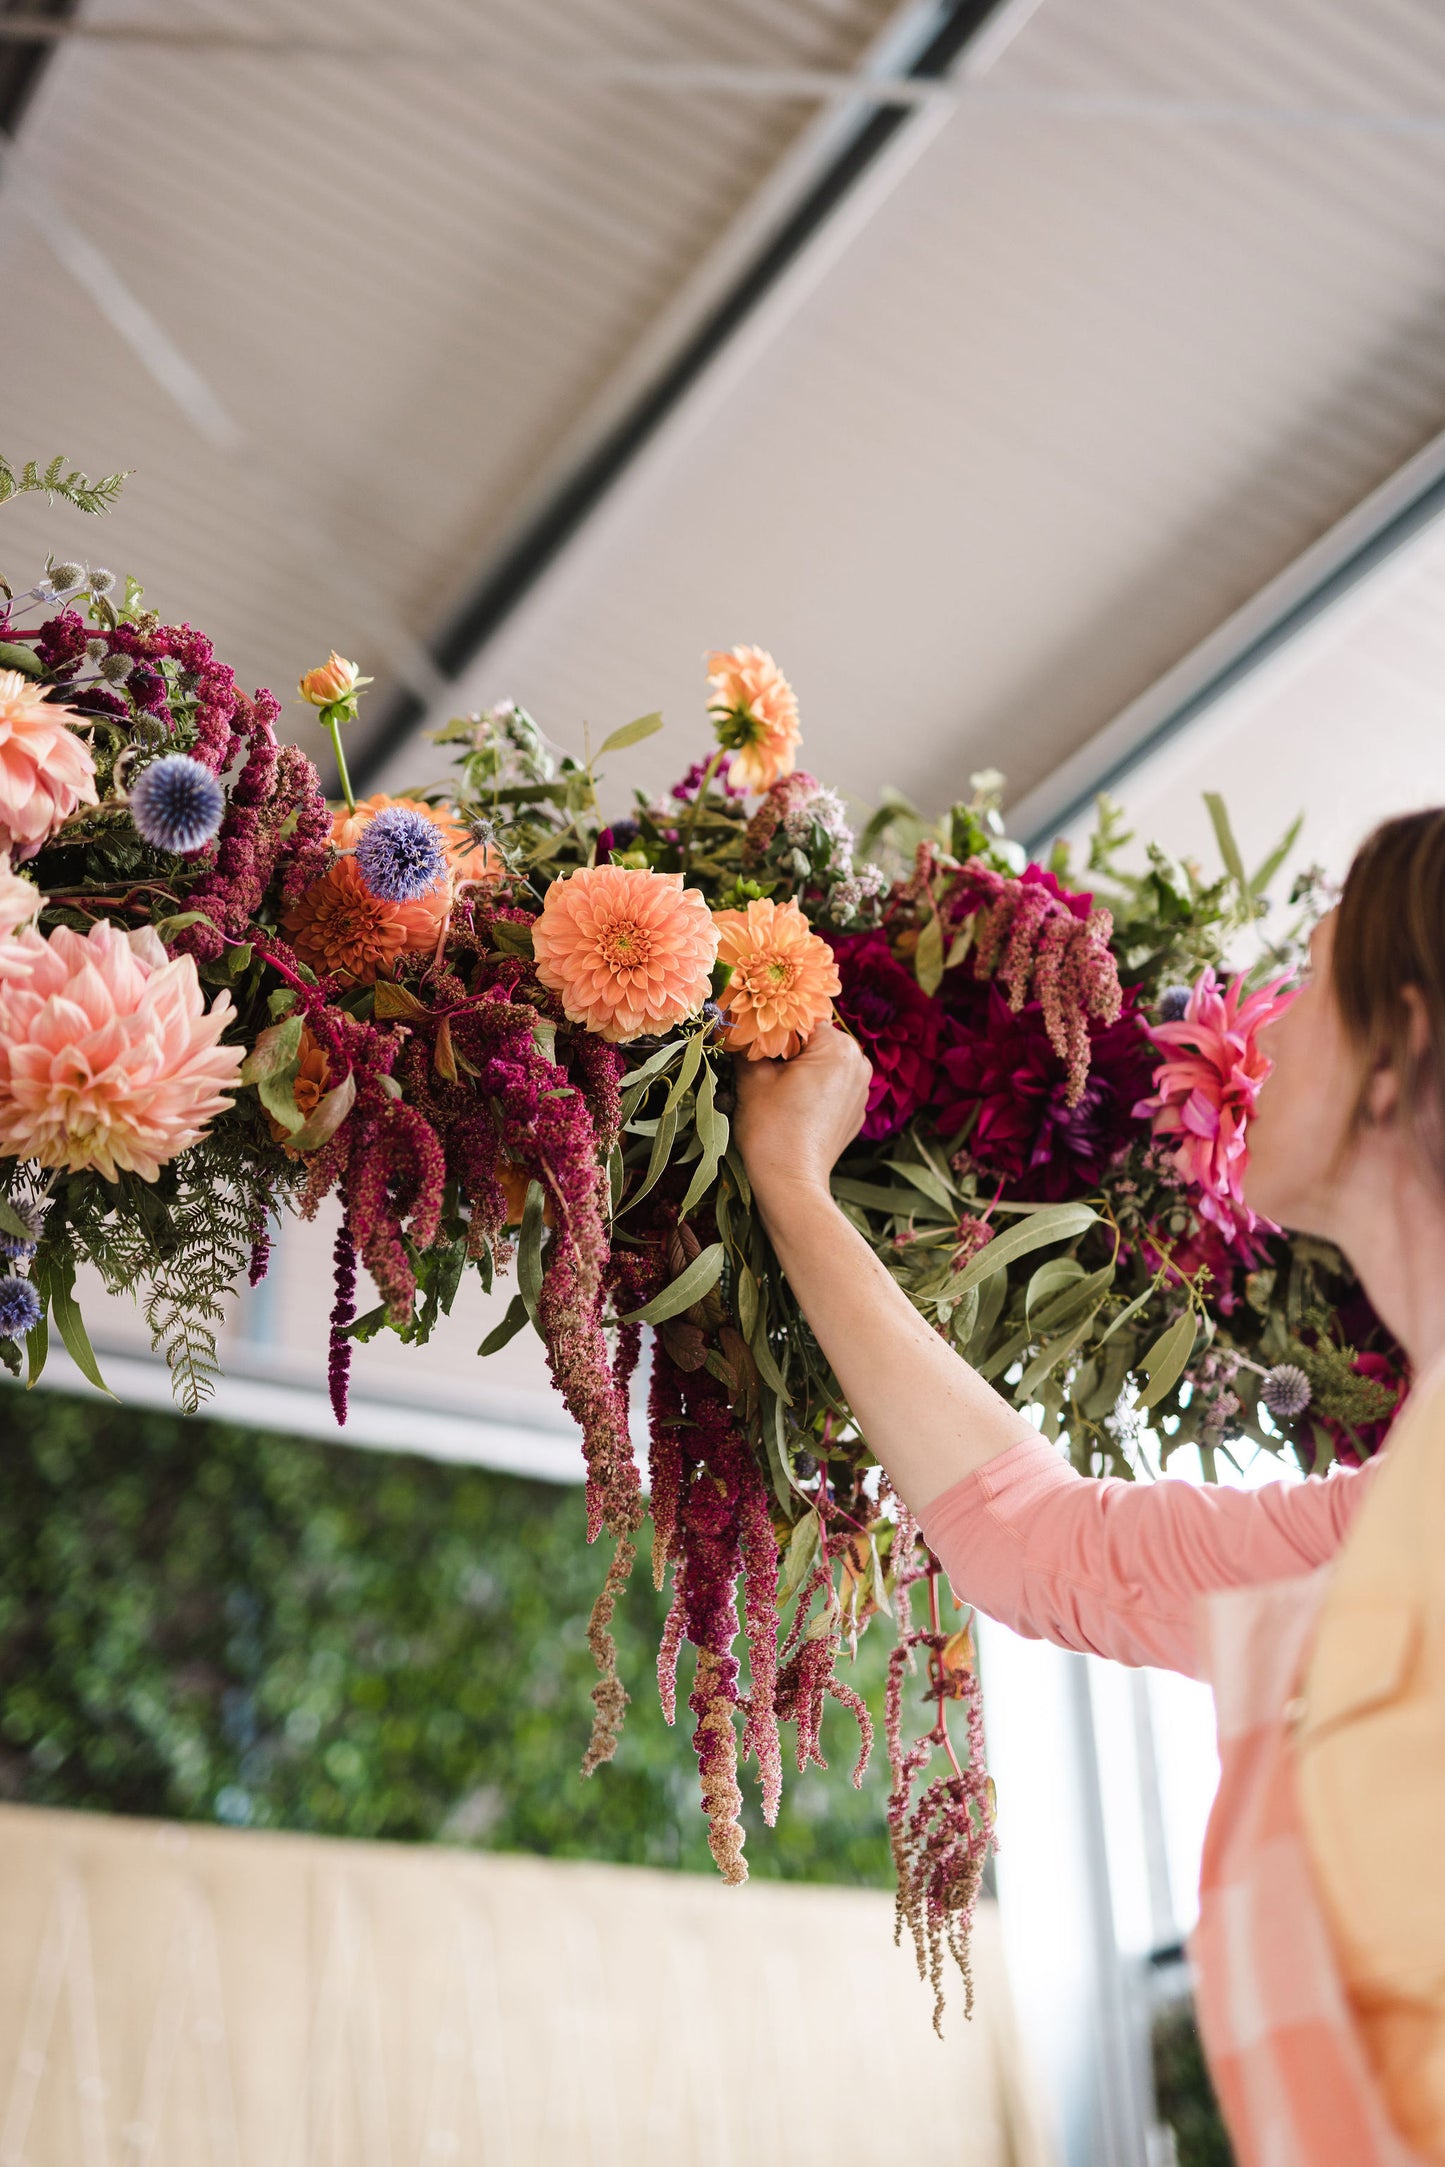 Floristry 2 day Intensive 23 & 24 May - Flower Farm